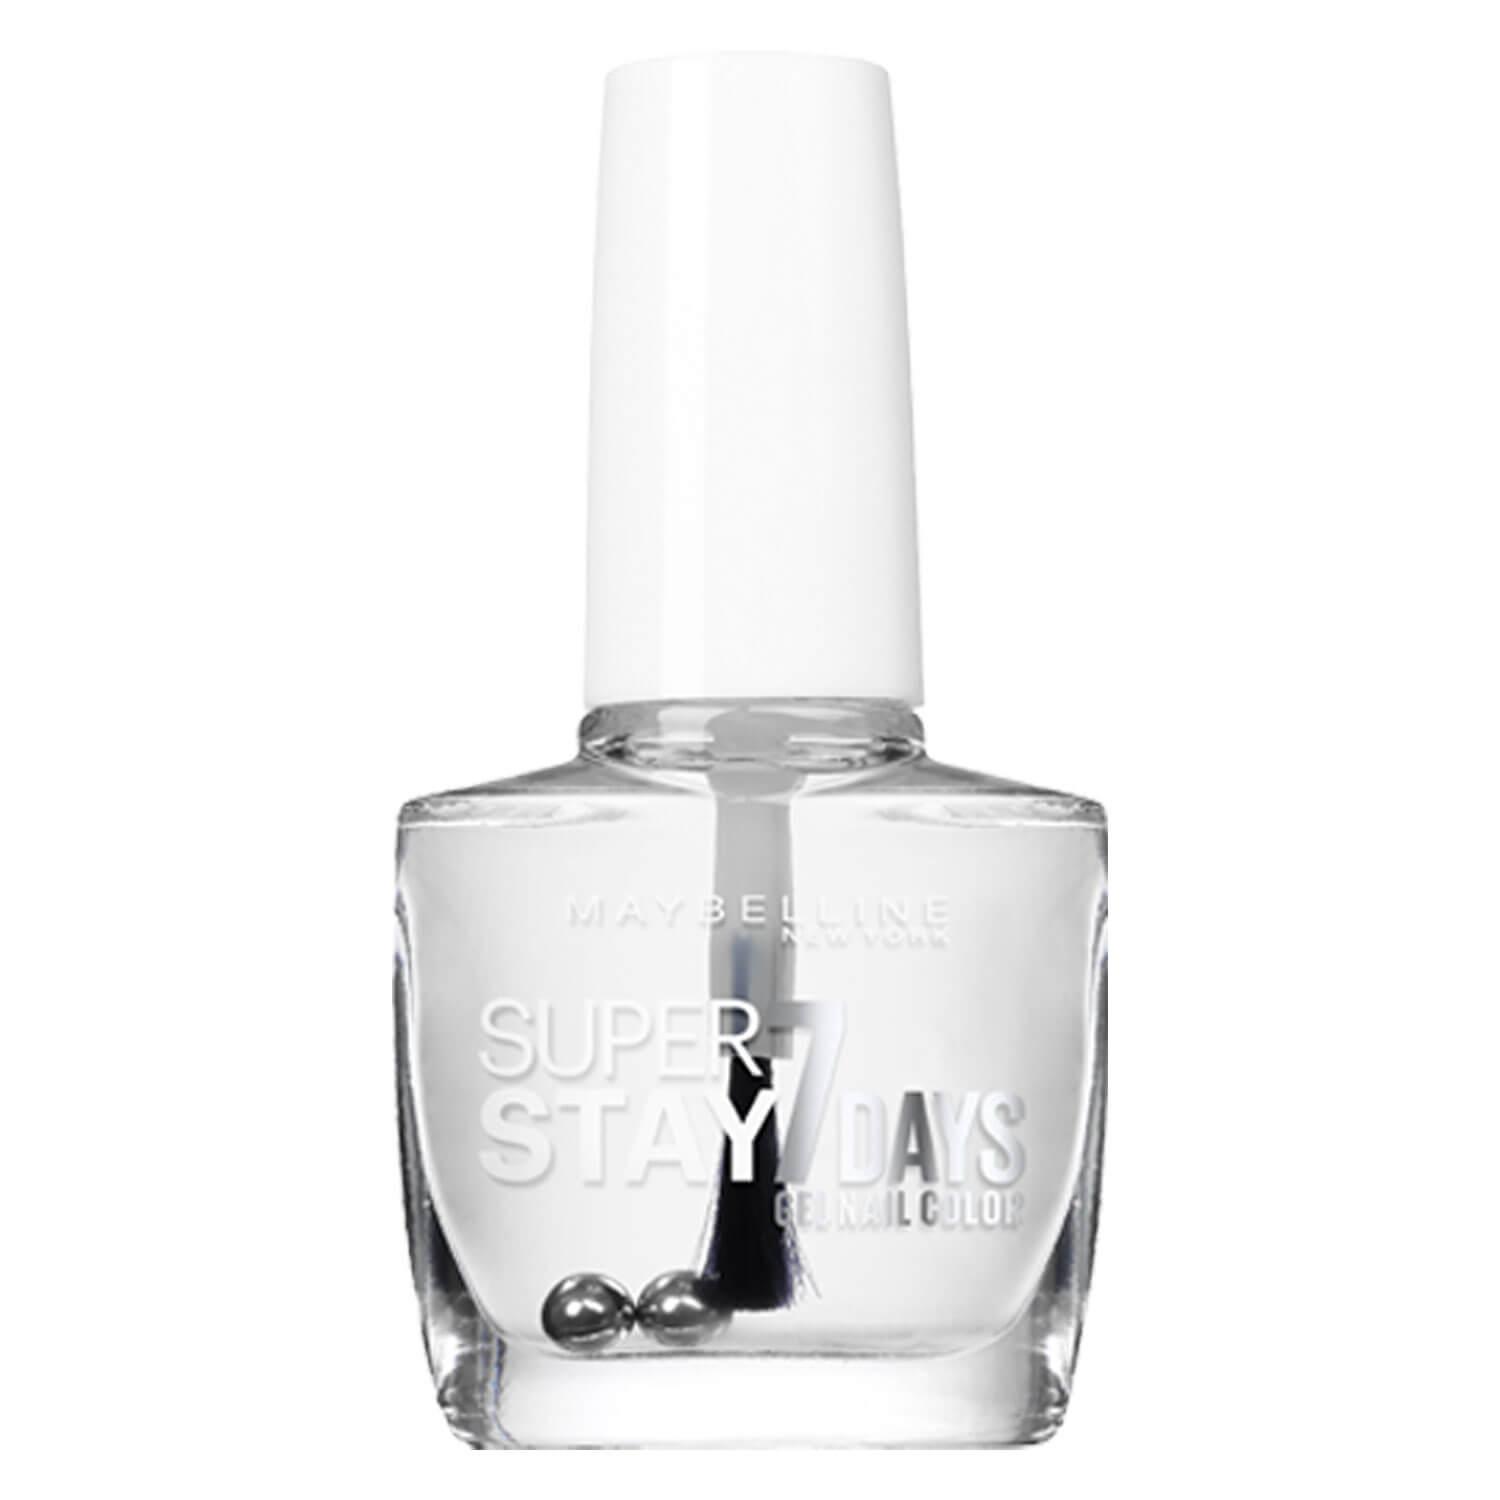 Maybelline NY Nails - Super Stay 7 Days Nagellack Nr. 25 Crystal Clear